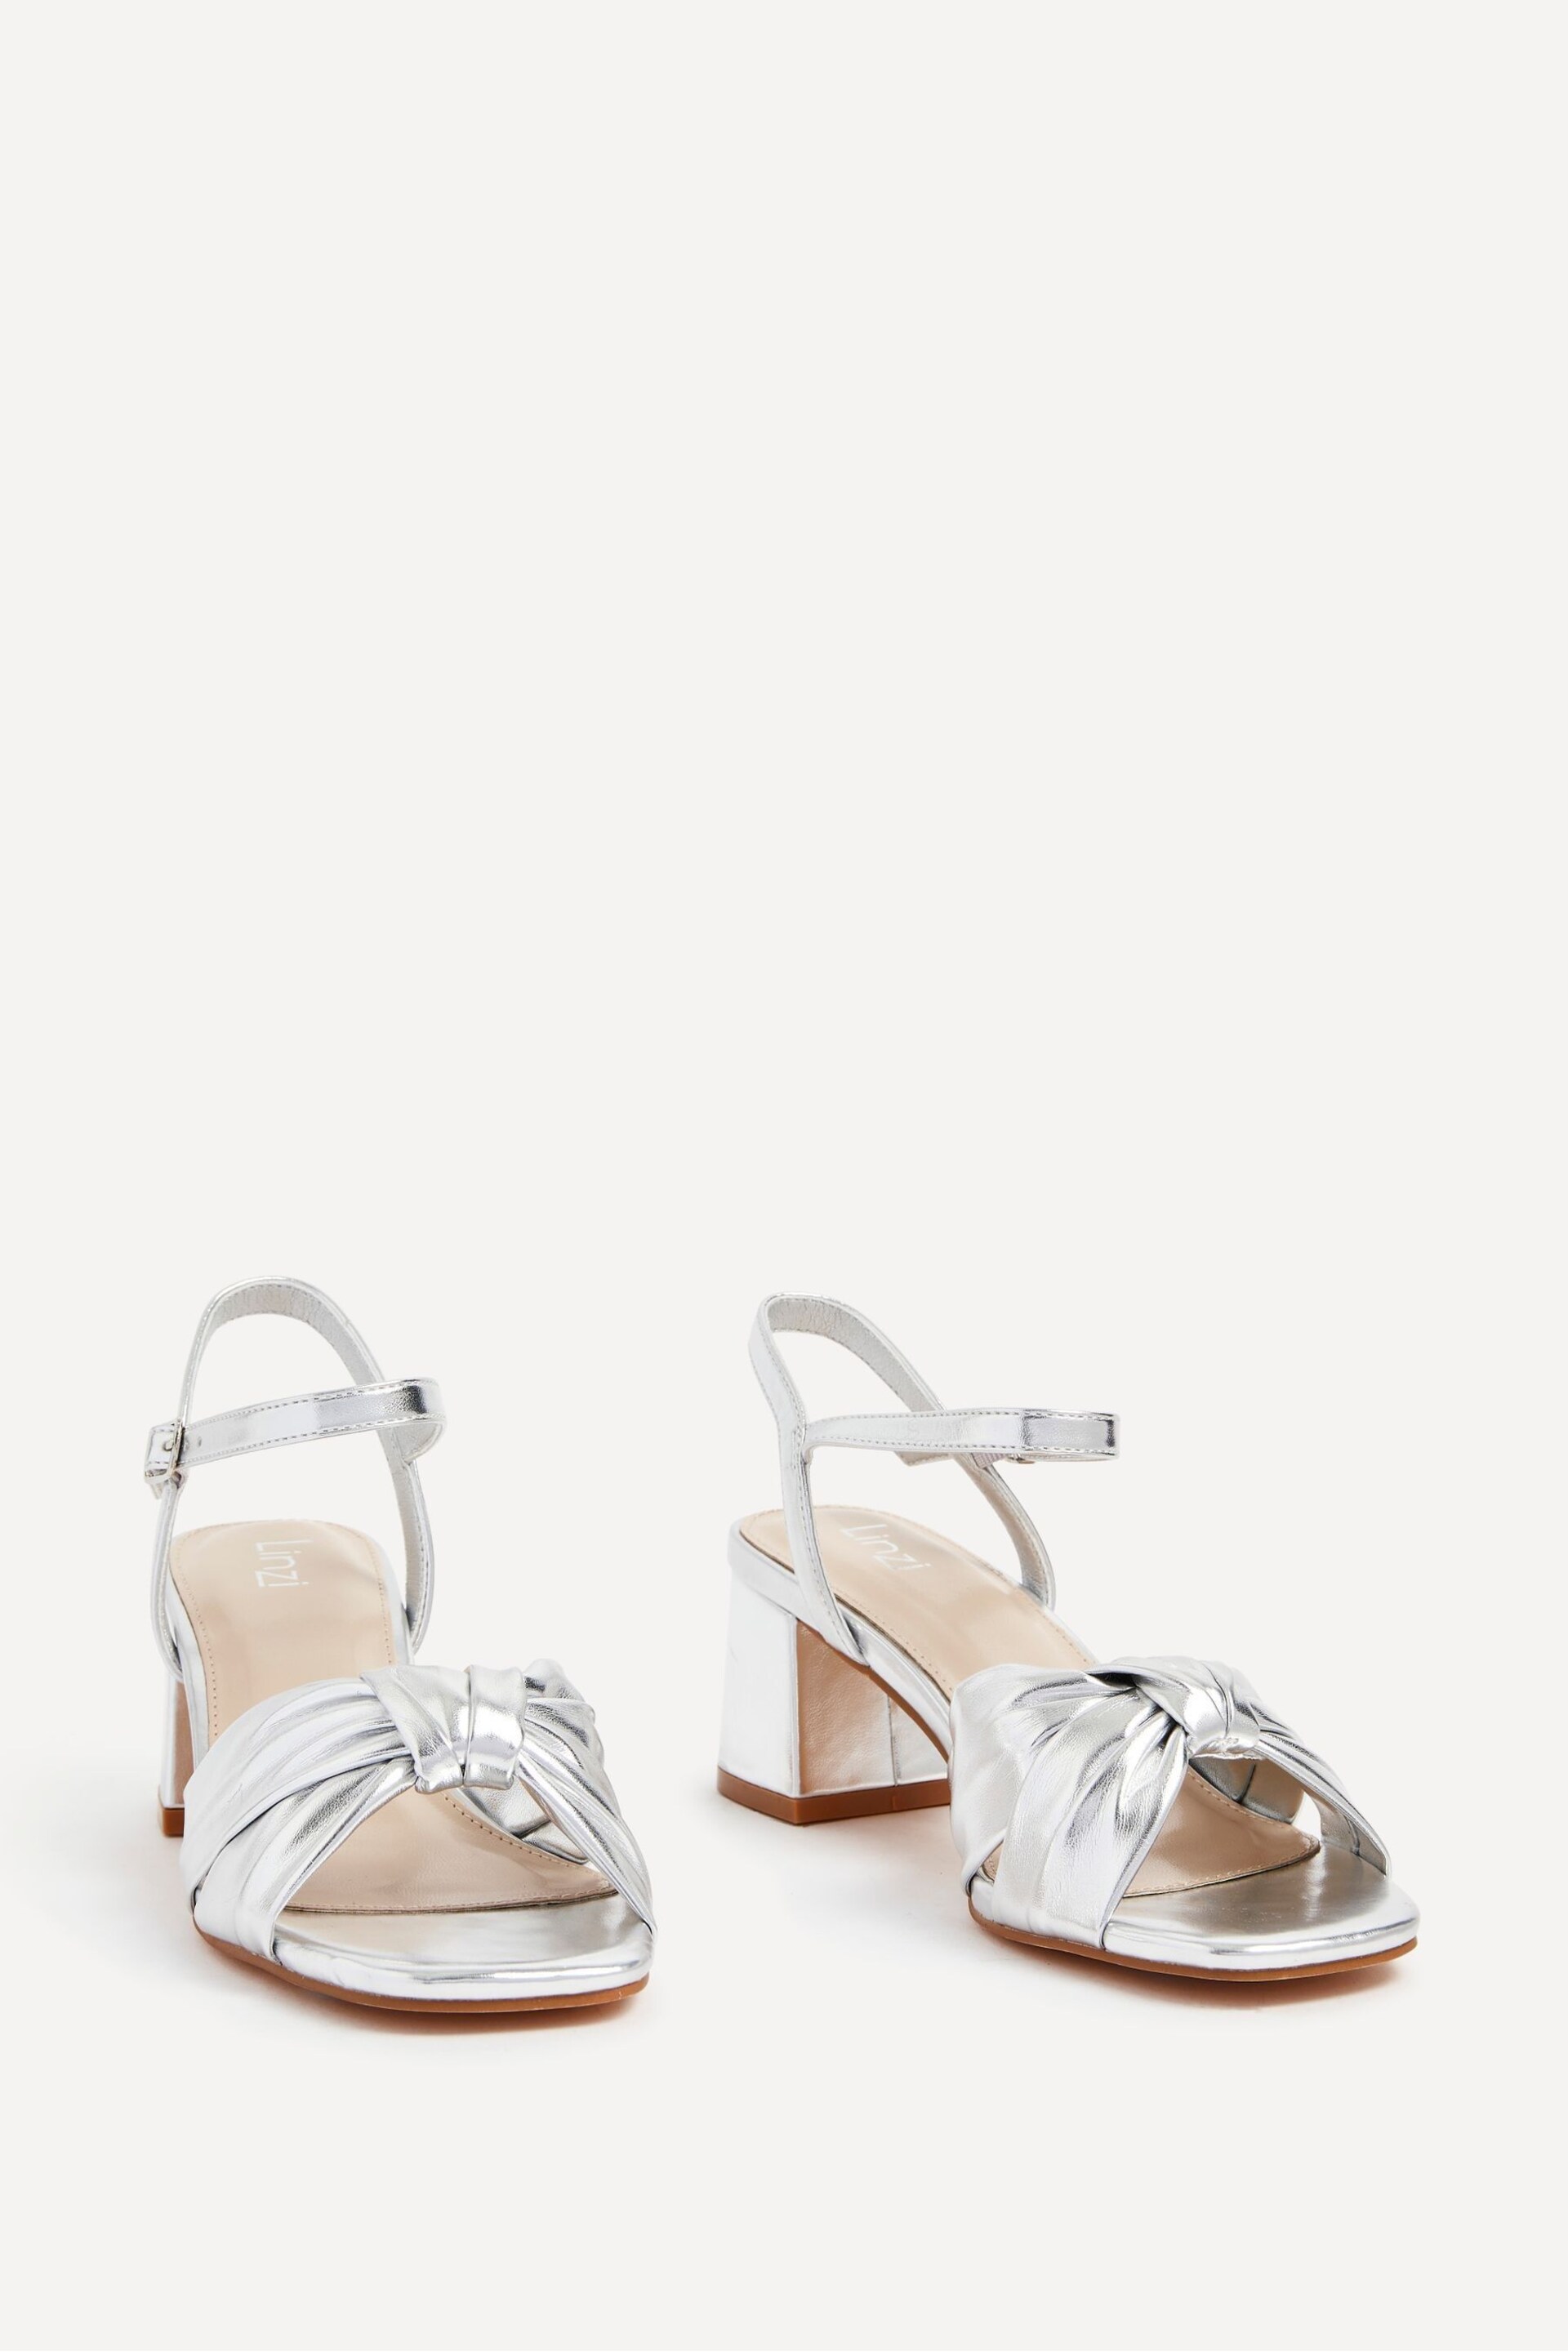 Linzi Silver Charlotte Block Heeled Sandals With Bow Front Detail - Image 3 of 5